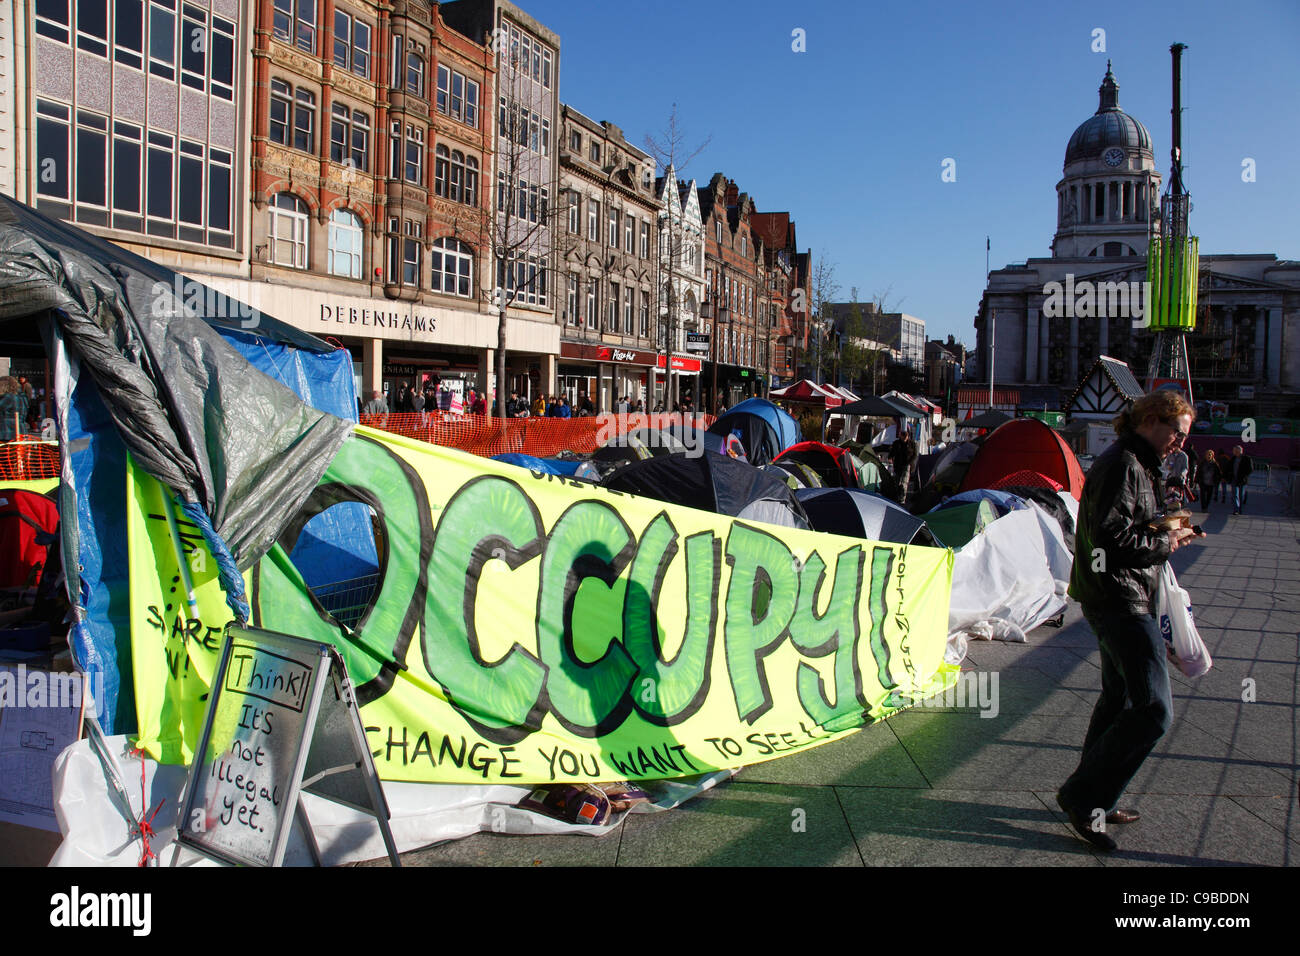 The Occupy Nottingham anti-capitalism protest camp in the Old Market Square, Nottingham, England, U.K. Stock Photo